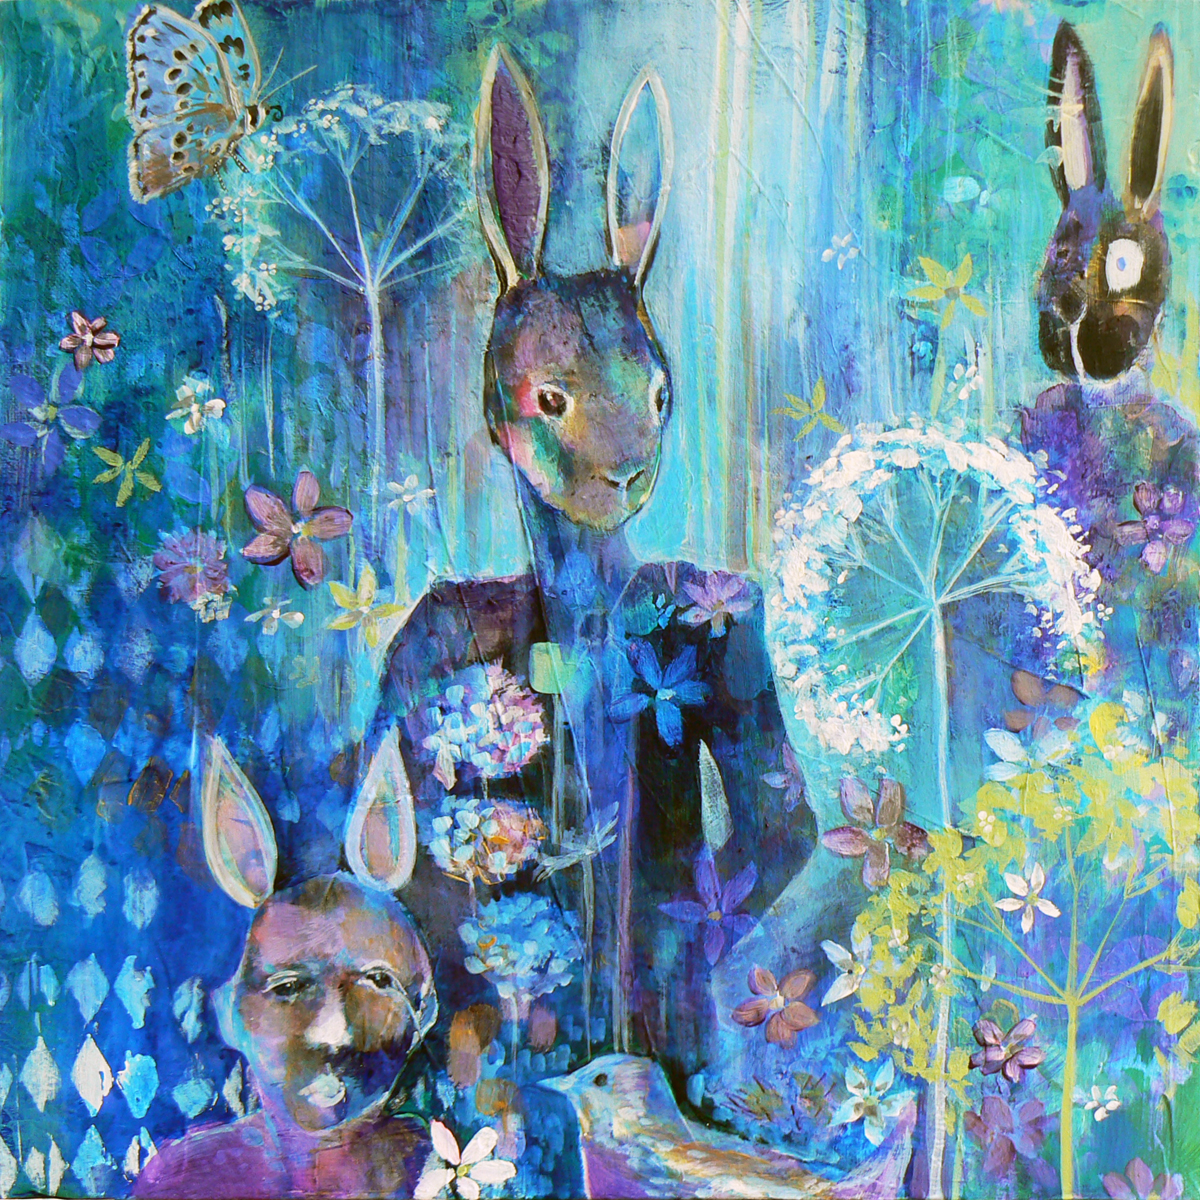 Going to the tea party ( contemporary narrative painting, hare, butterfly and Alice in wonderland / Through the looking glass) (2018) Acrylic painting by Carolynne Coulson